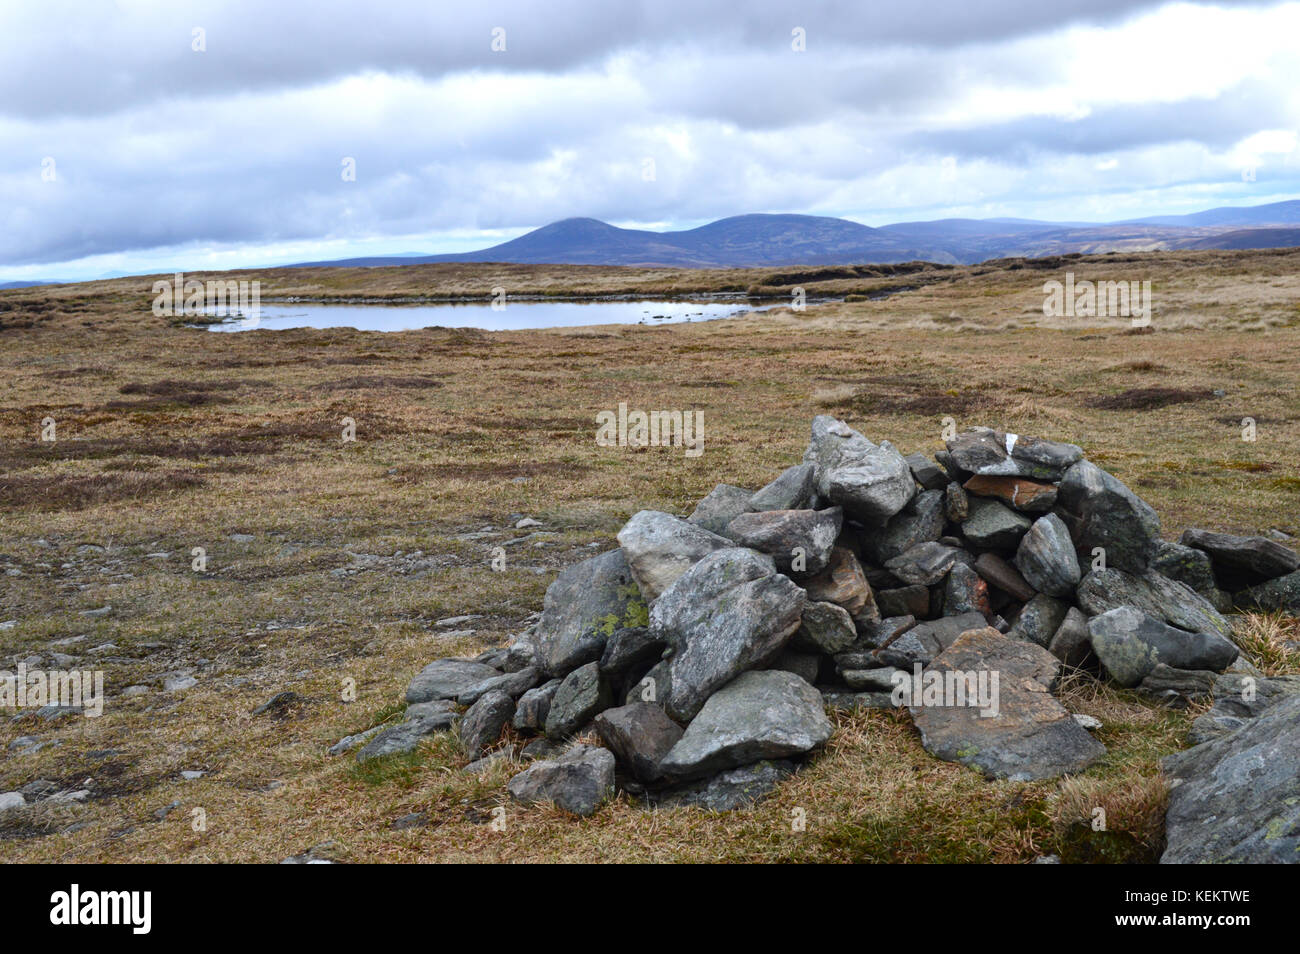 The Scottish Mountains Mount Keen & Braid Cairn from the Summit Pile of Stones on Green Hill near the Scottish Mountain Corbett Ben Tirran (The Goet) Stock Photo